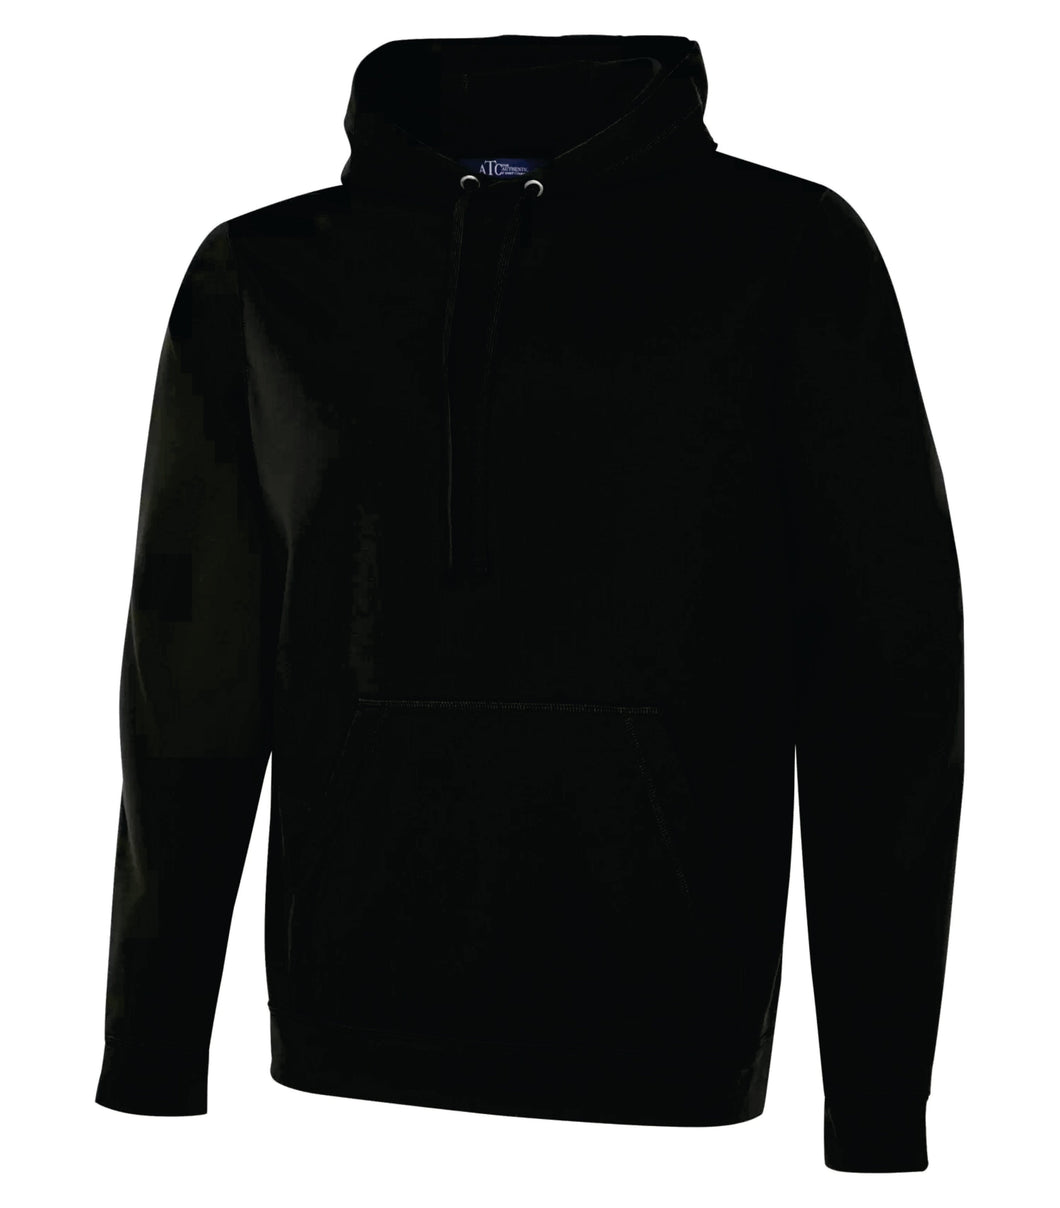 ATC™ GAME DAY™ FLEECE HOODIE Y2005 (YOUTH)